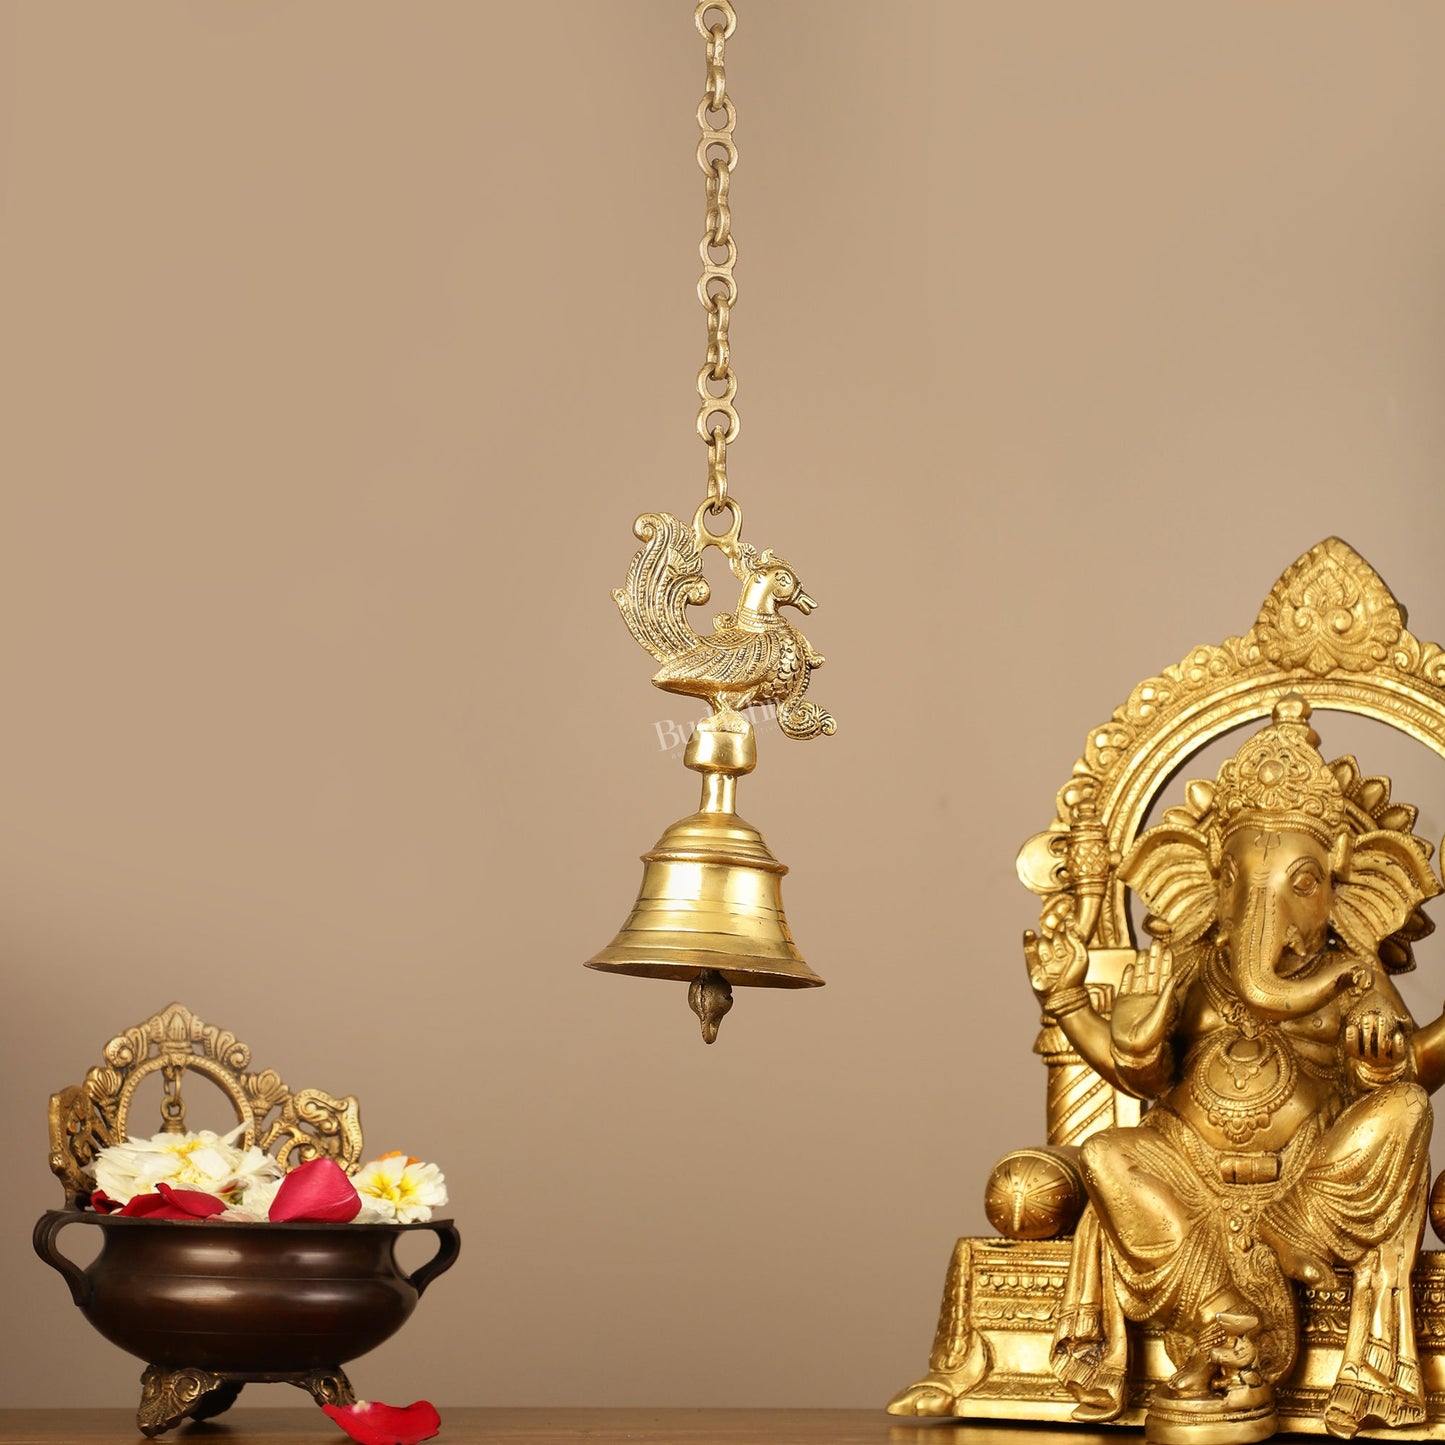 Superfine Brass Hanging Peacock Temple Bell - 7.5 Inch with 20-Inch Chain - Budhshiv.com